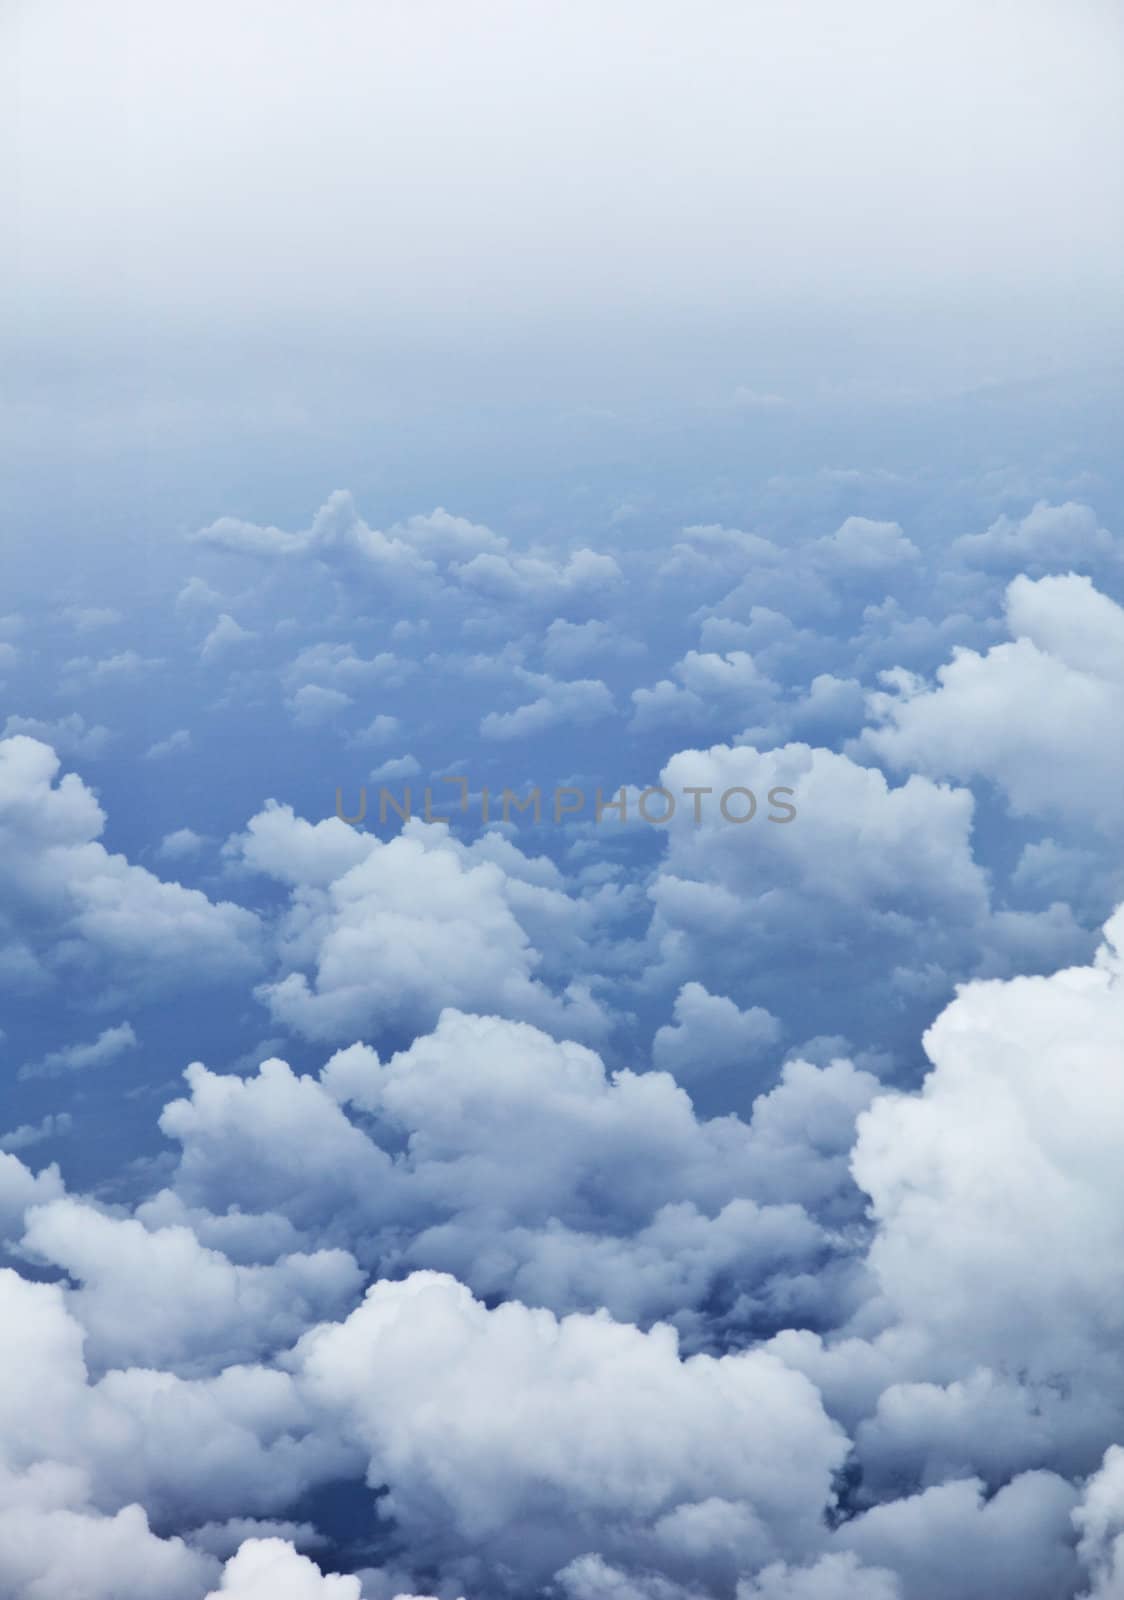 Vertical background - photo of the clouds from a bird's eye